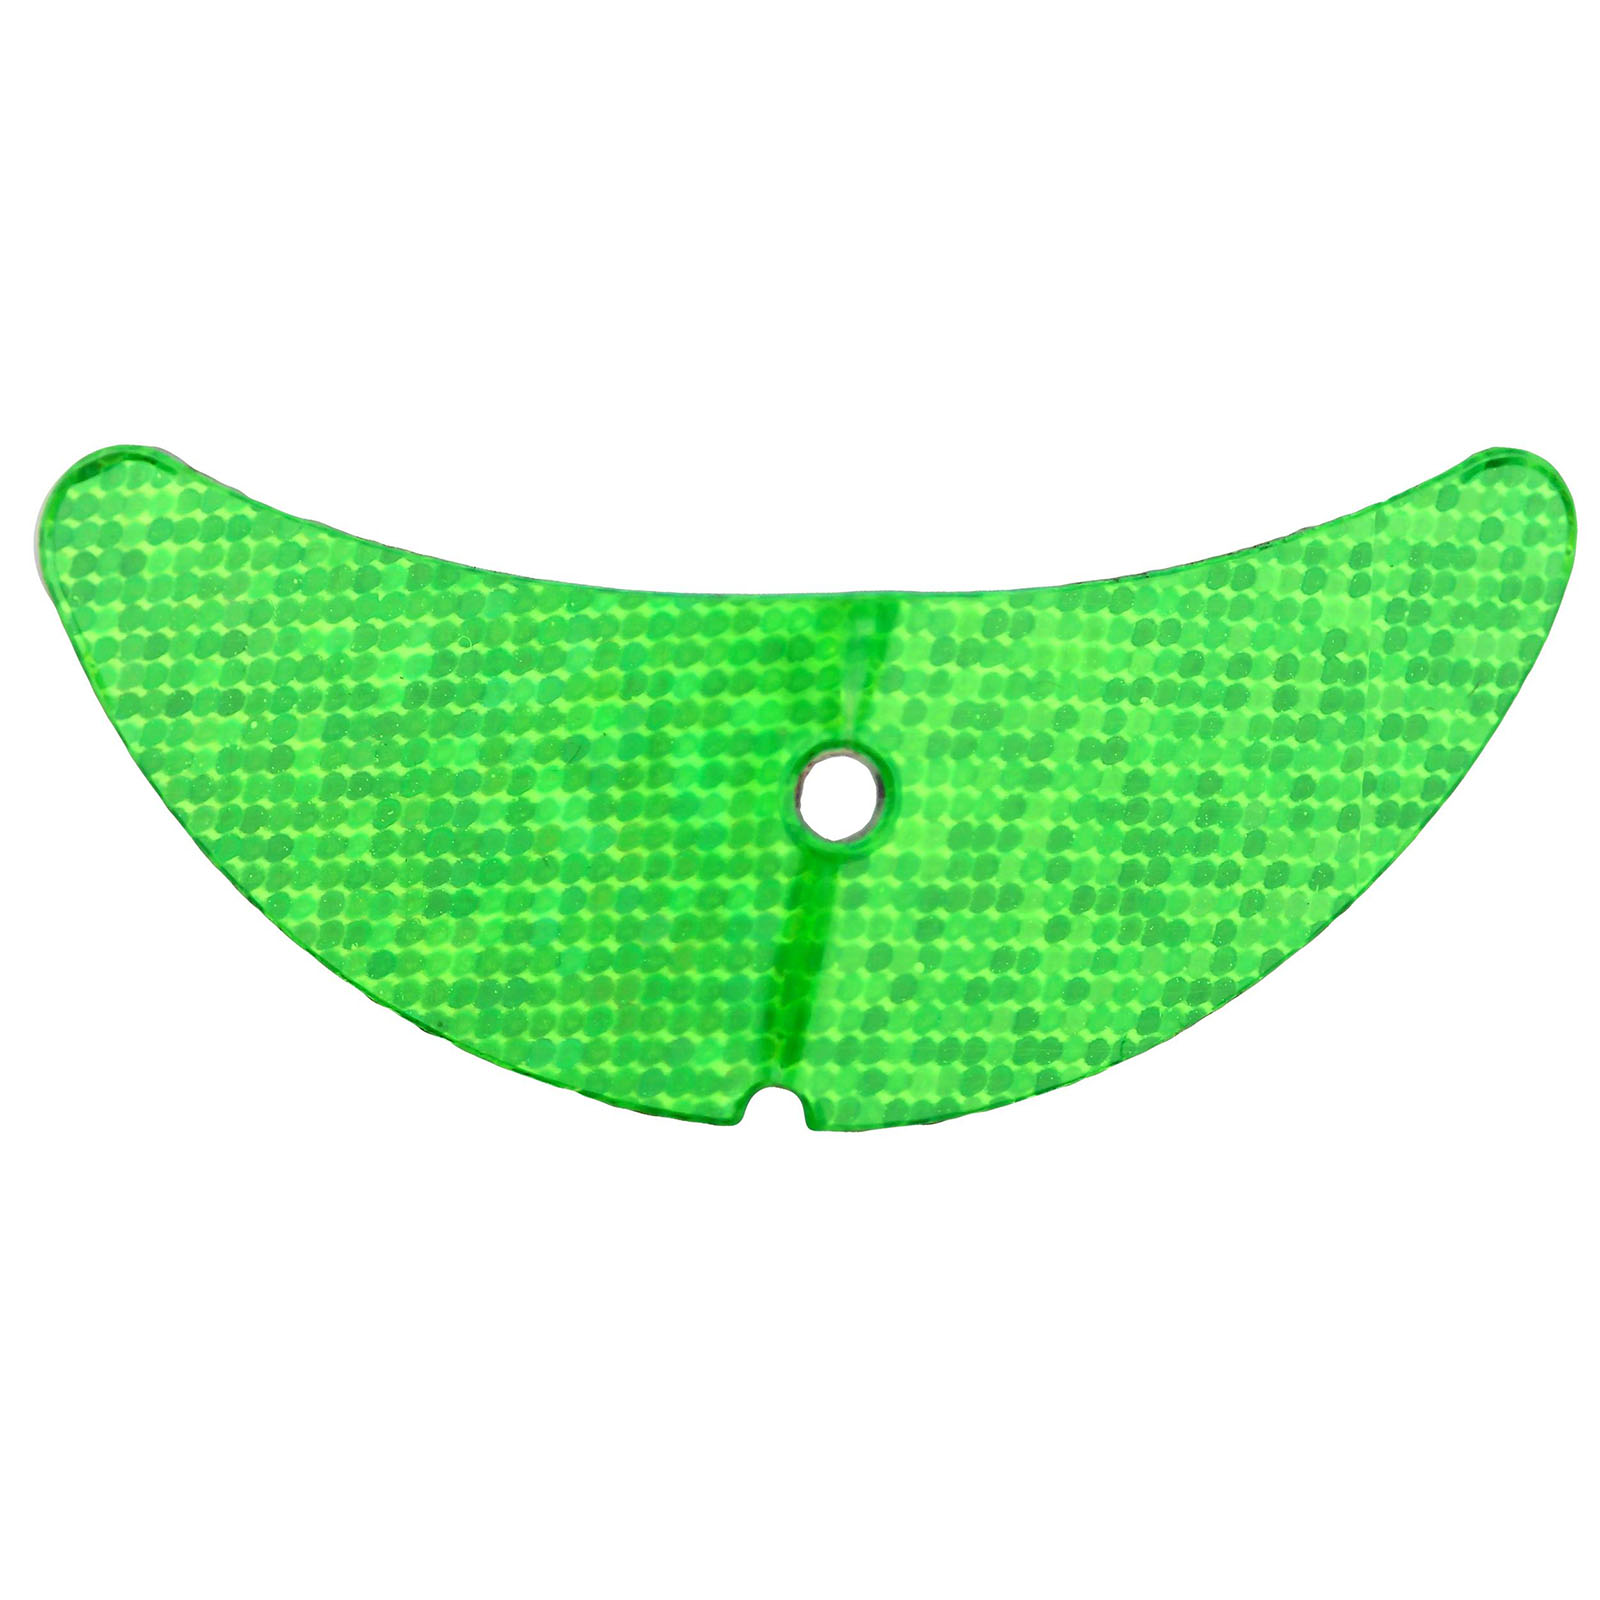 Mack's Lure 65205 Smile Blades - 1Chartreuse